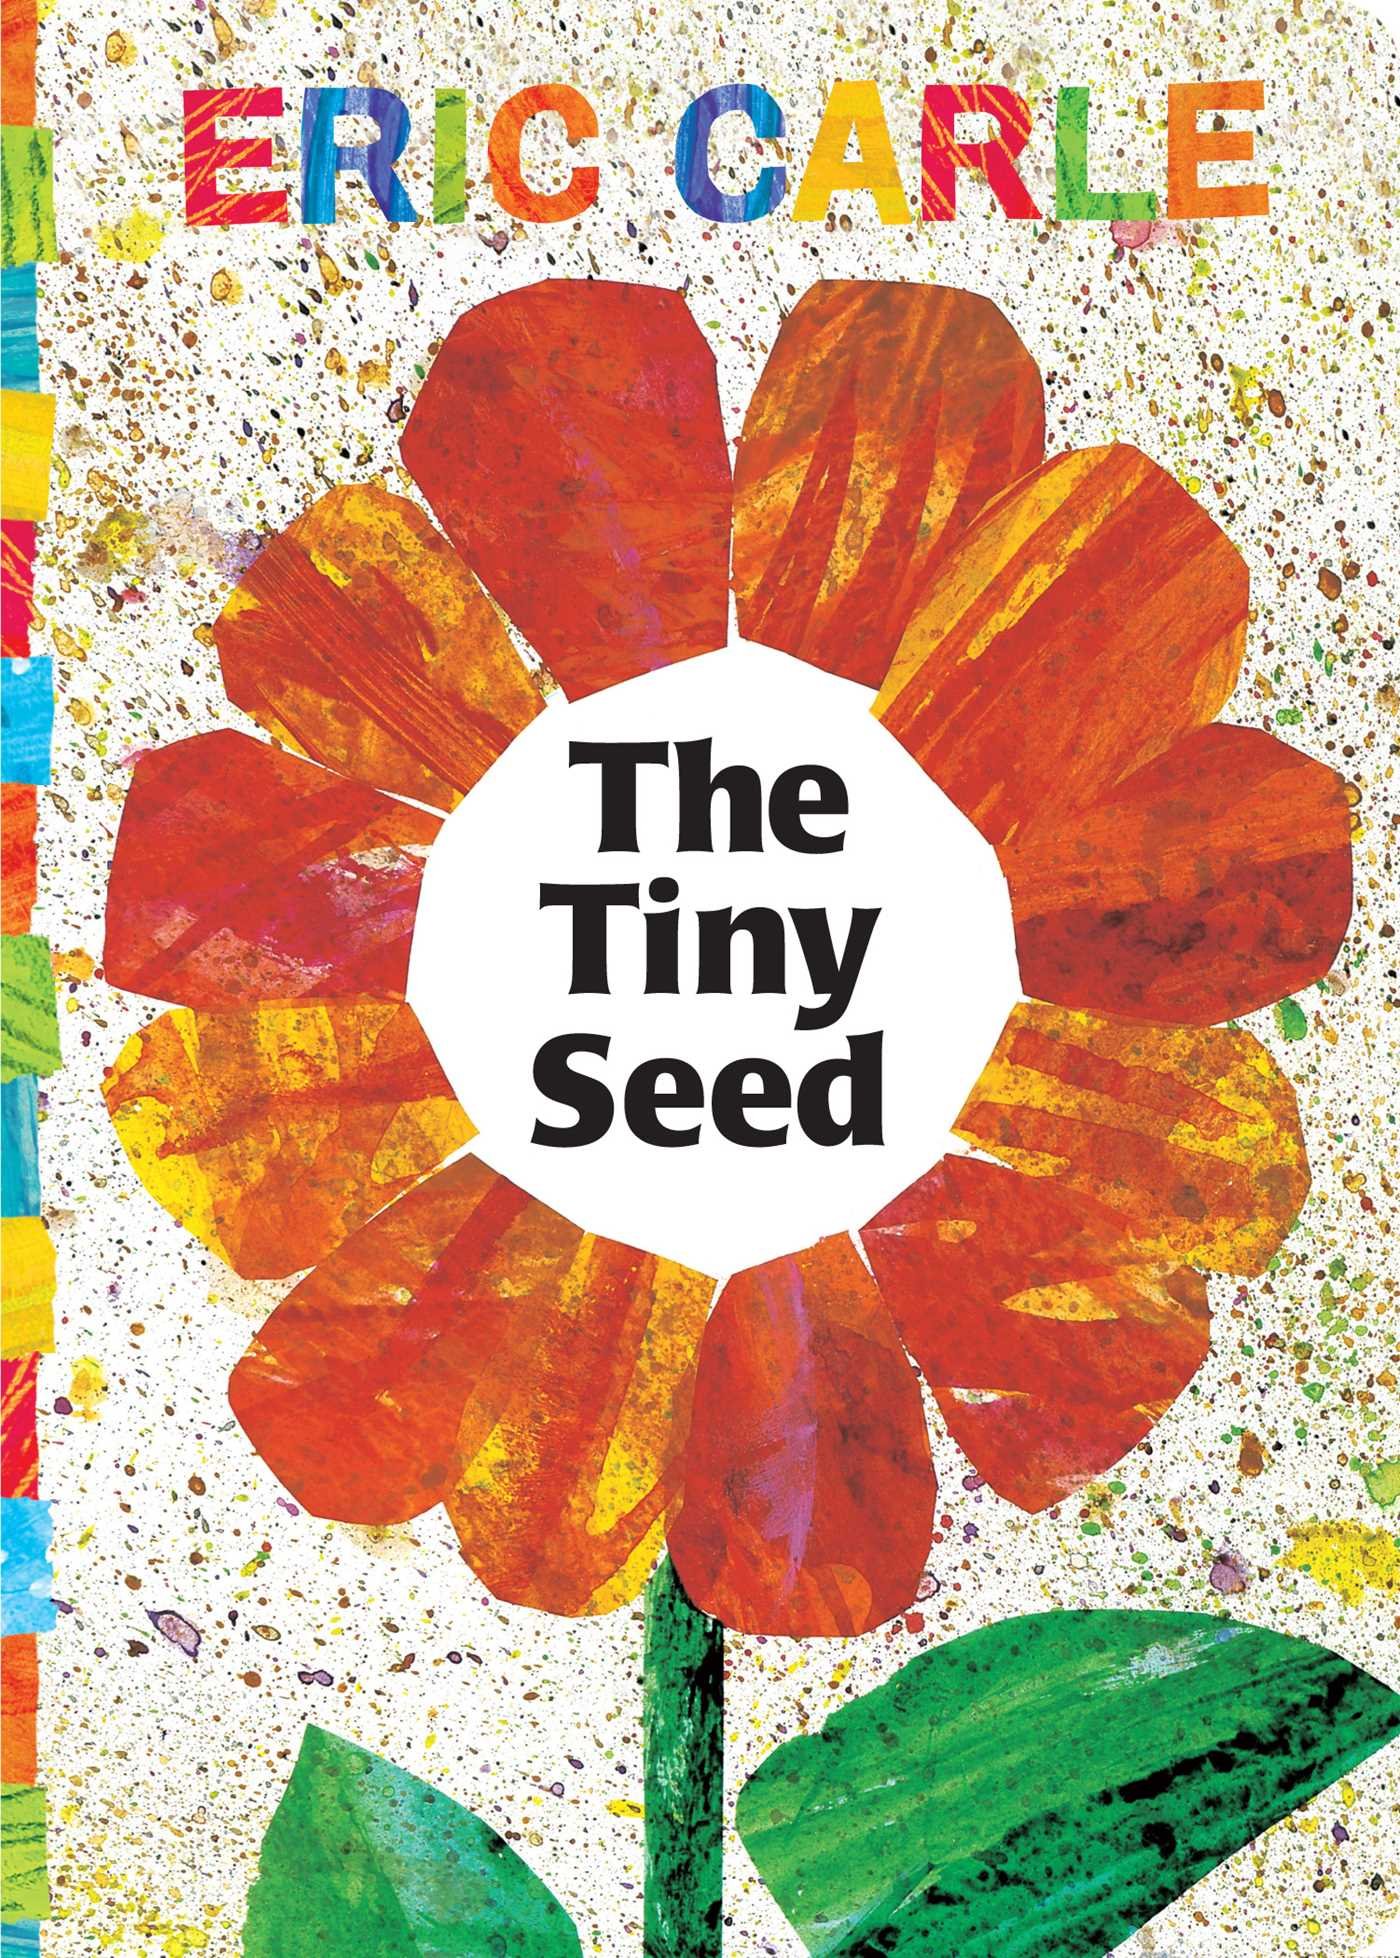 speech and language teaching concepts for The Tiny Seed in speech therapy